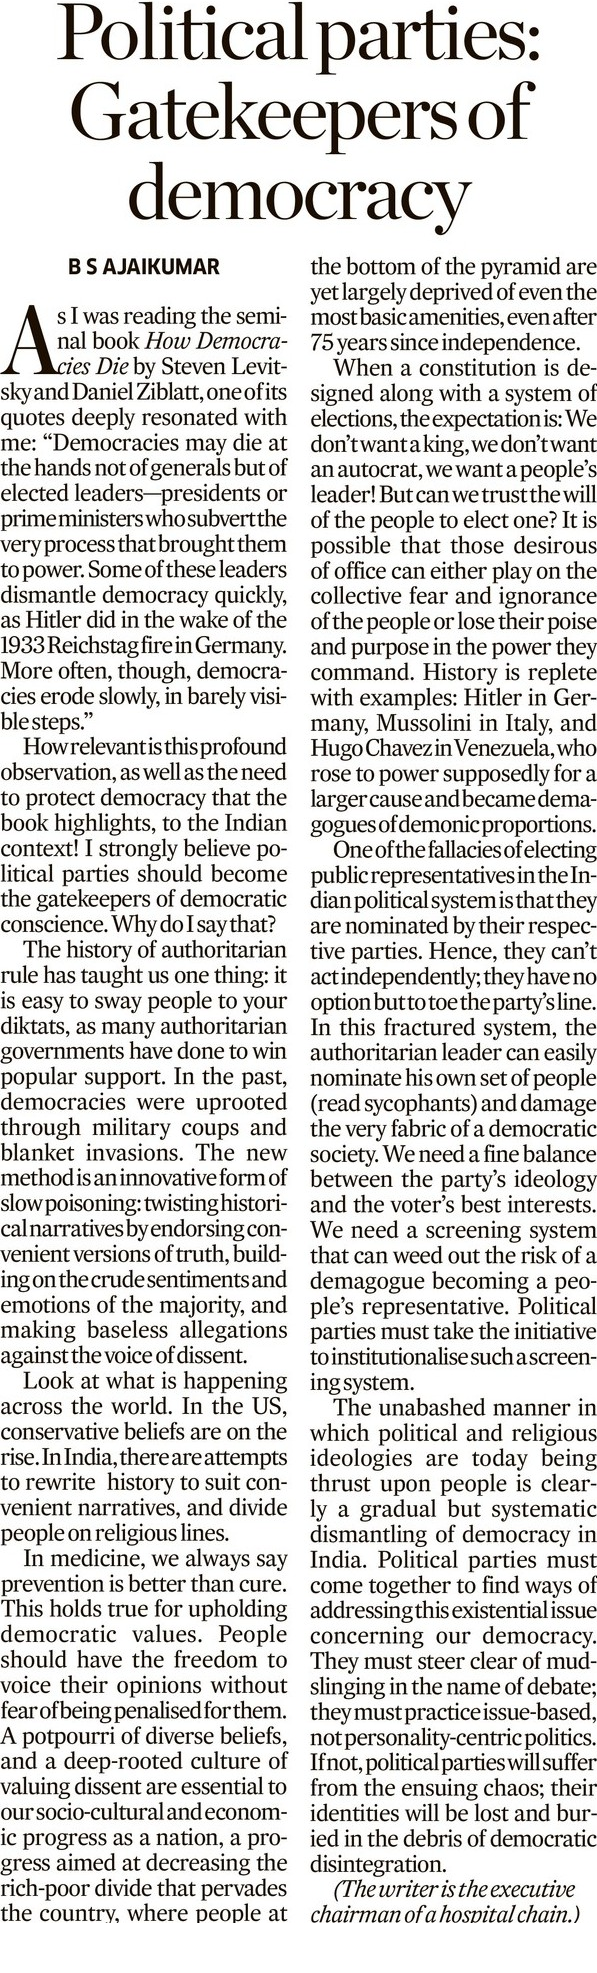 A thought leadership article on 'Political parties: Gatekeepers of democracy' contributed by Dr. BS Ajaikumar was featured in the Deccan Herald publication